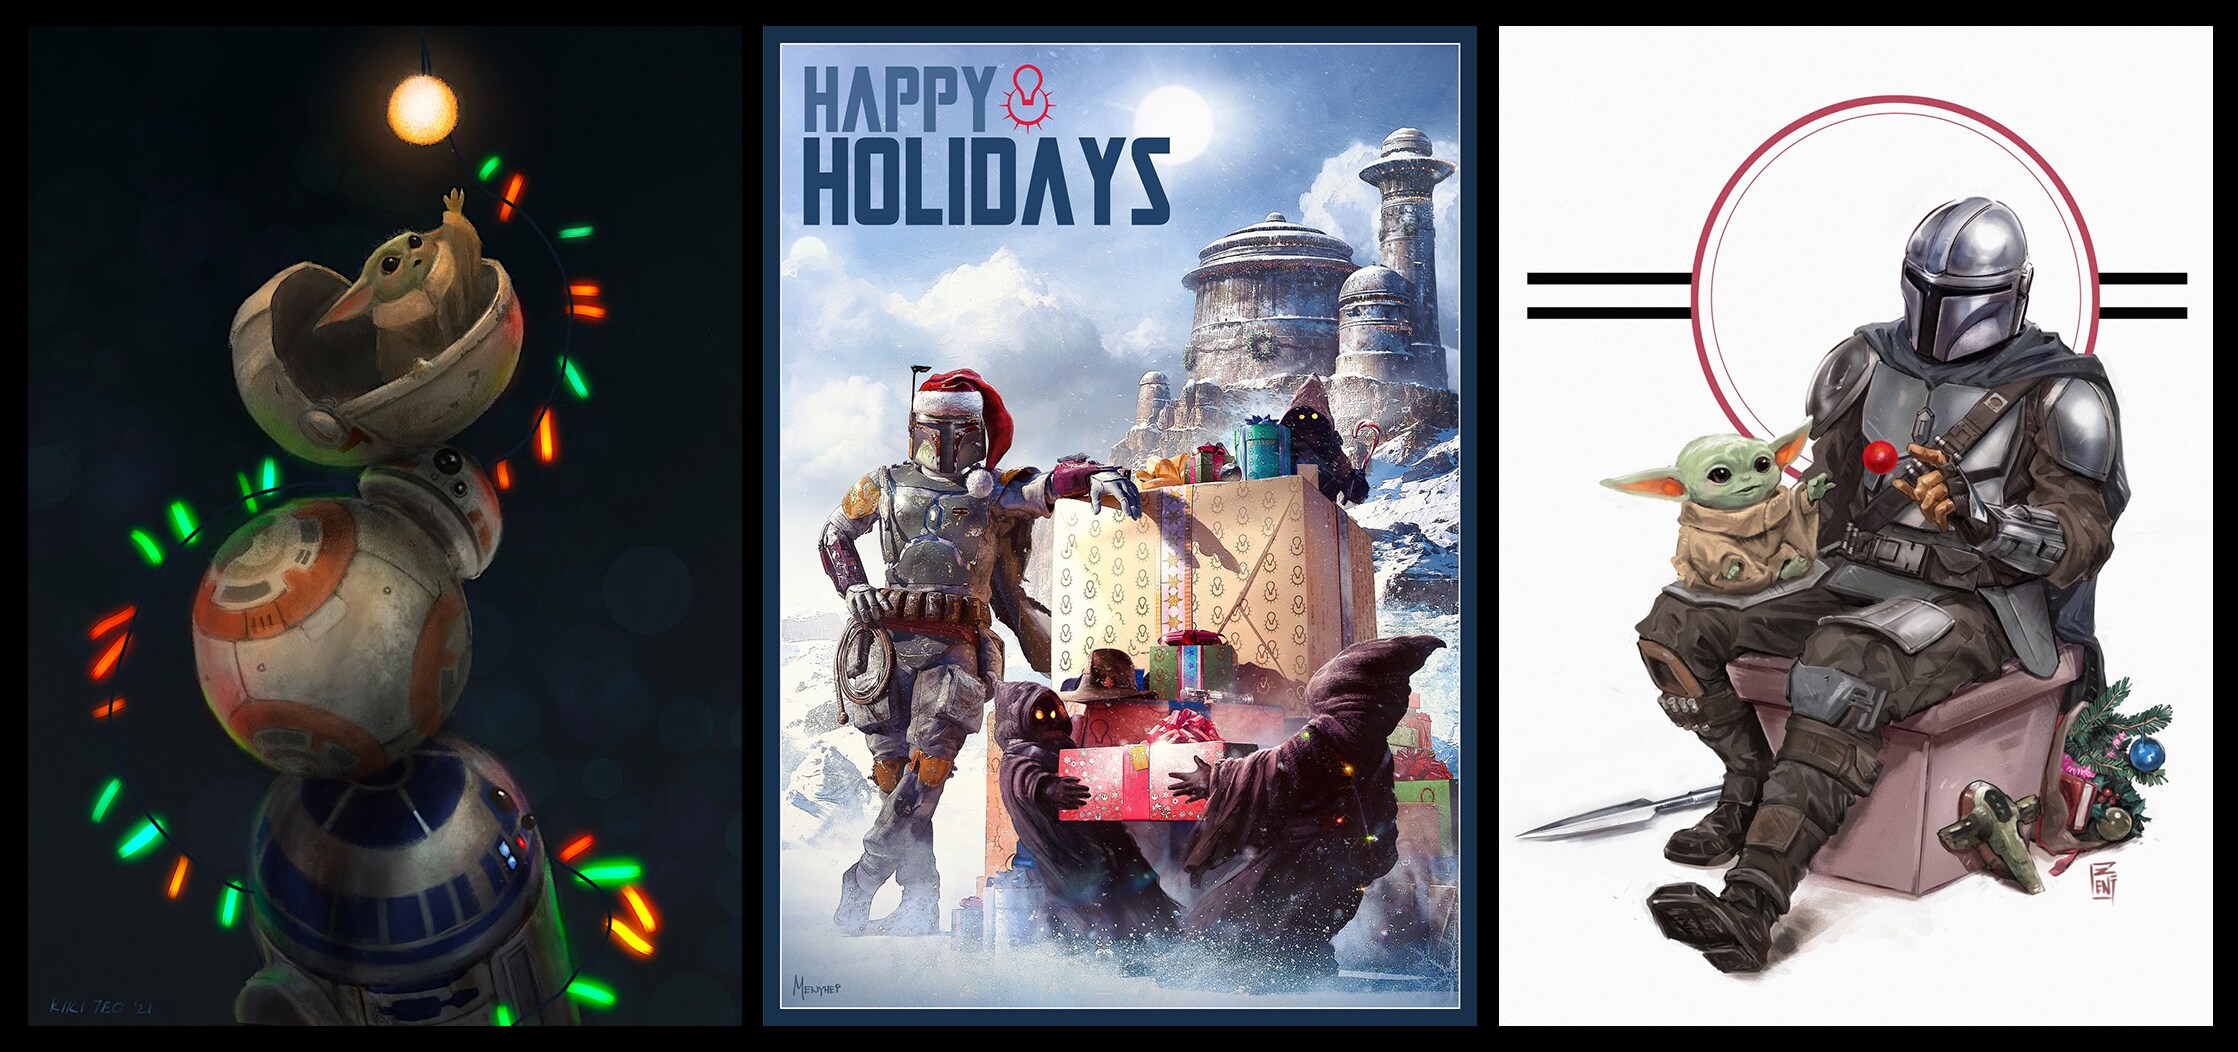 ILM's 2021 holiday card